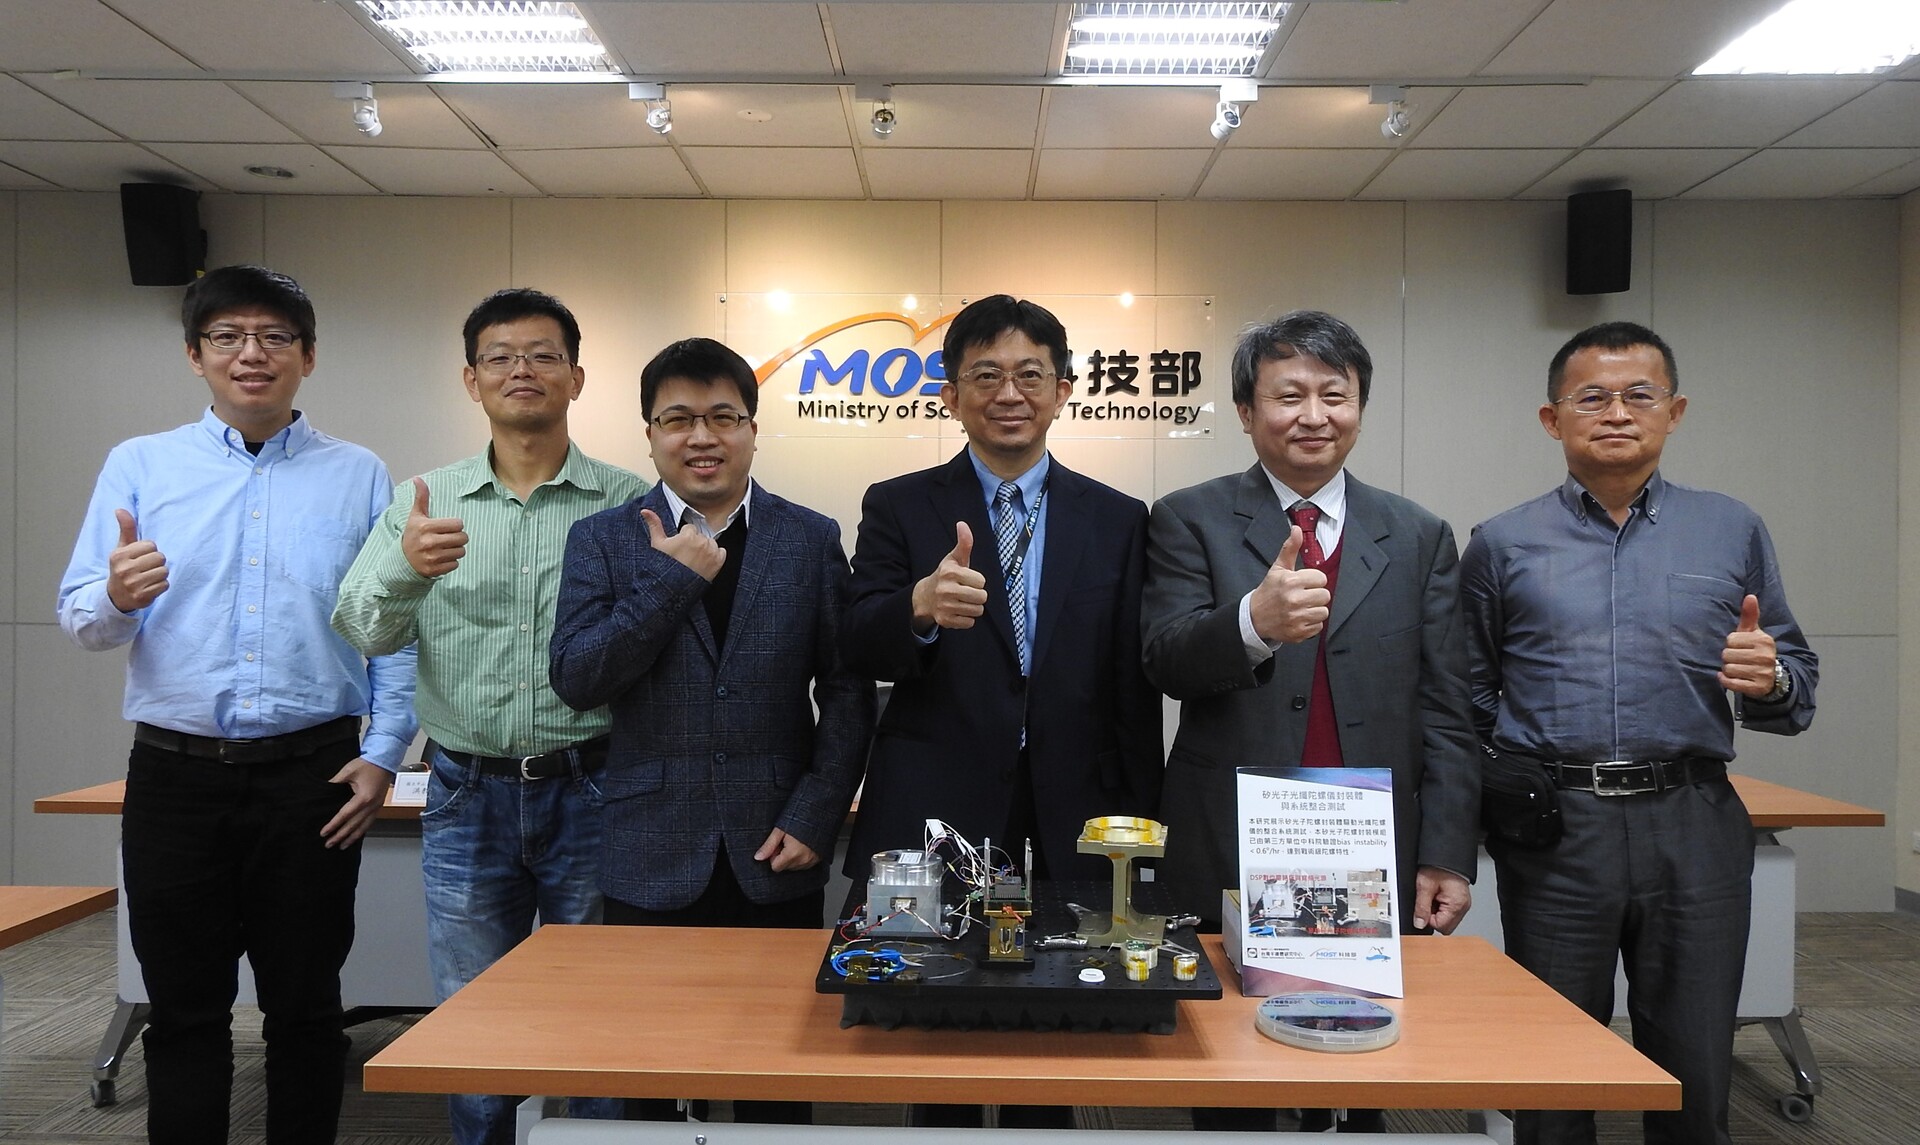 From the left are professors of NSYSU Department of Photonics Chun-Ta Wang, Chia-Chien Wei, Yung-Jr Hung, and Director General of the Department of Engineering and Technologies, Ministry of Science and Technology, Chih-Peng Li, Professor Yi-Jen Chiu of NSYSU Department of Photonics, and Professor Chua-Chin Wang of the Department of Electrical Engineering.